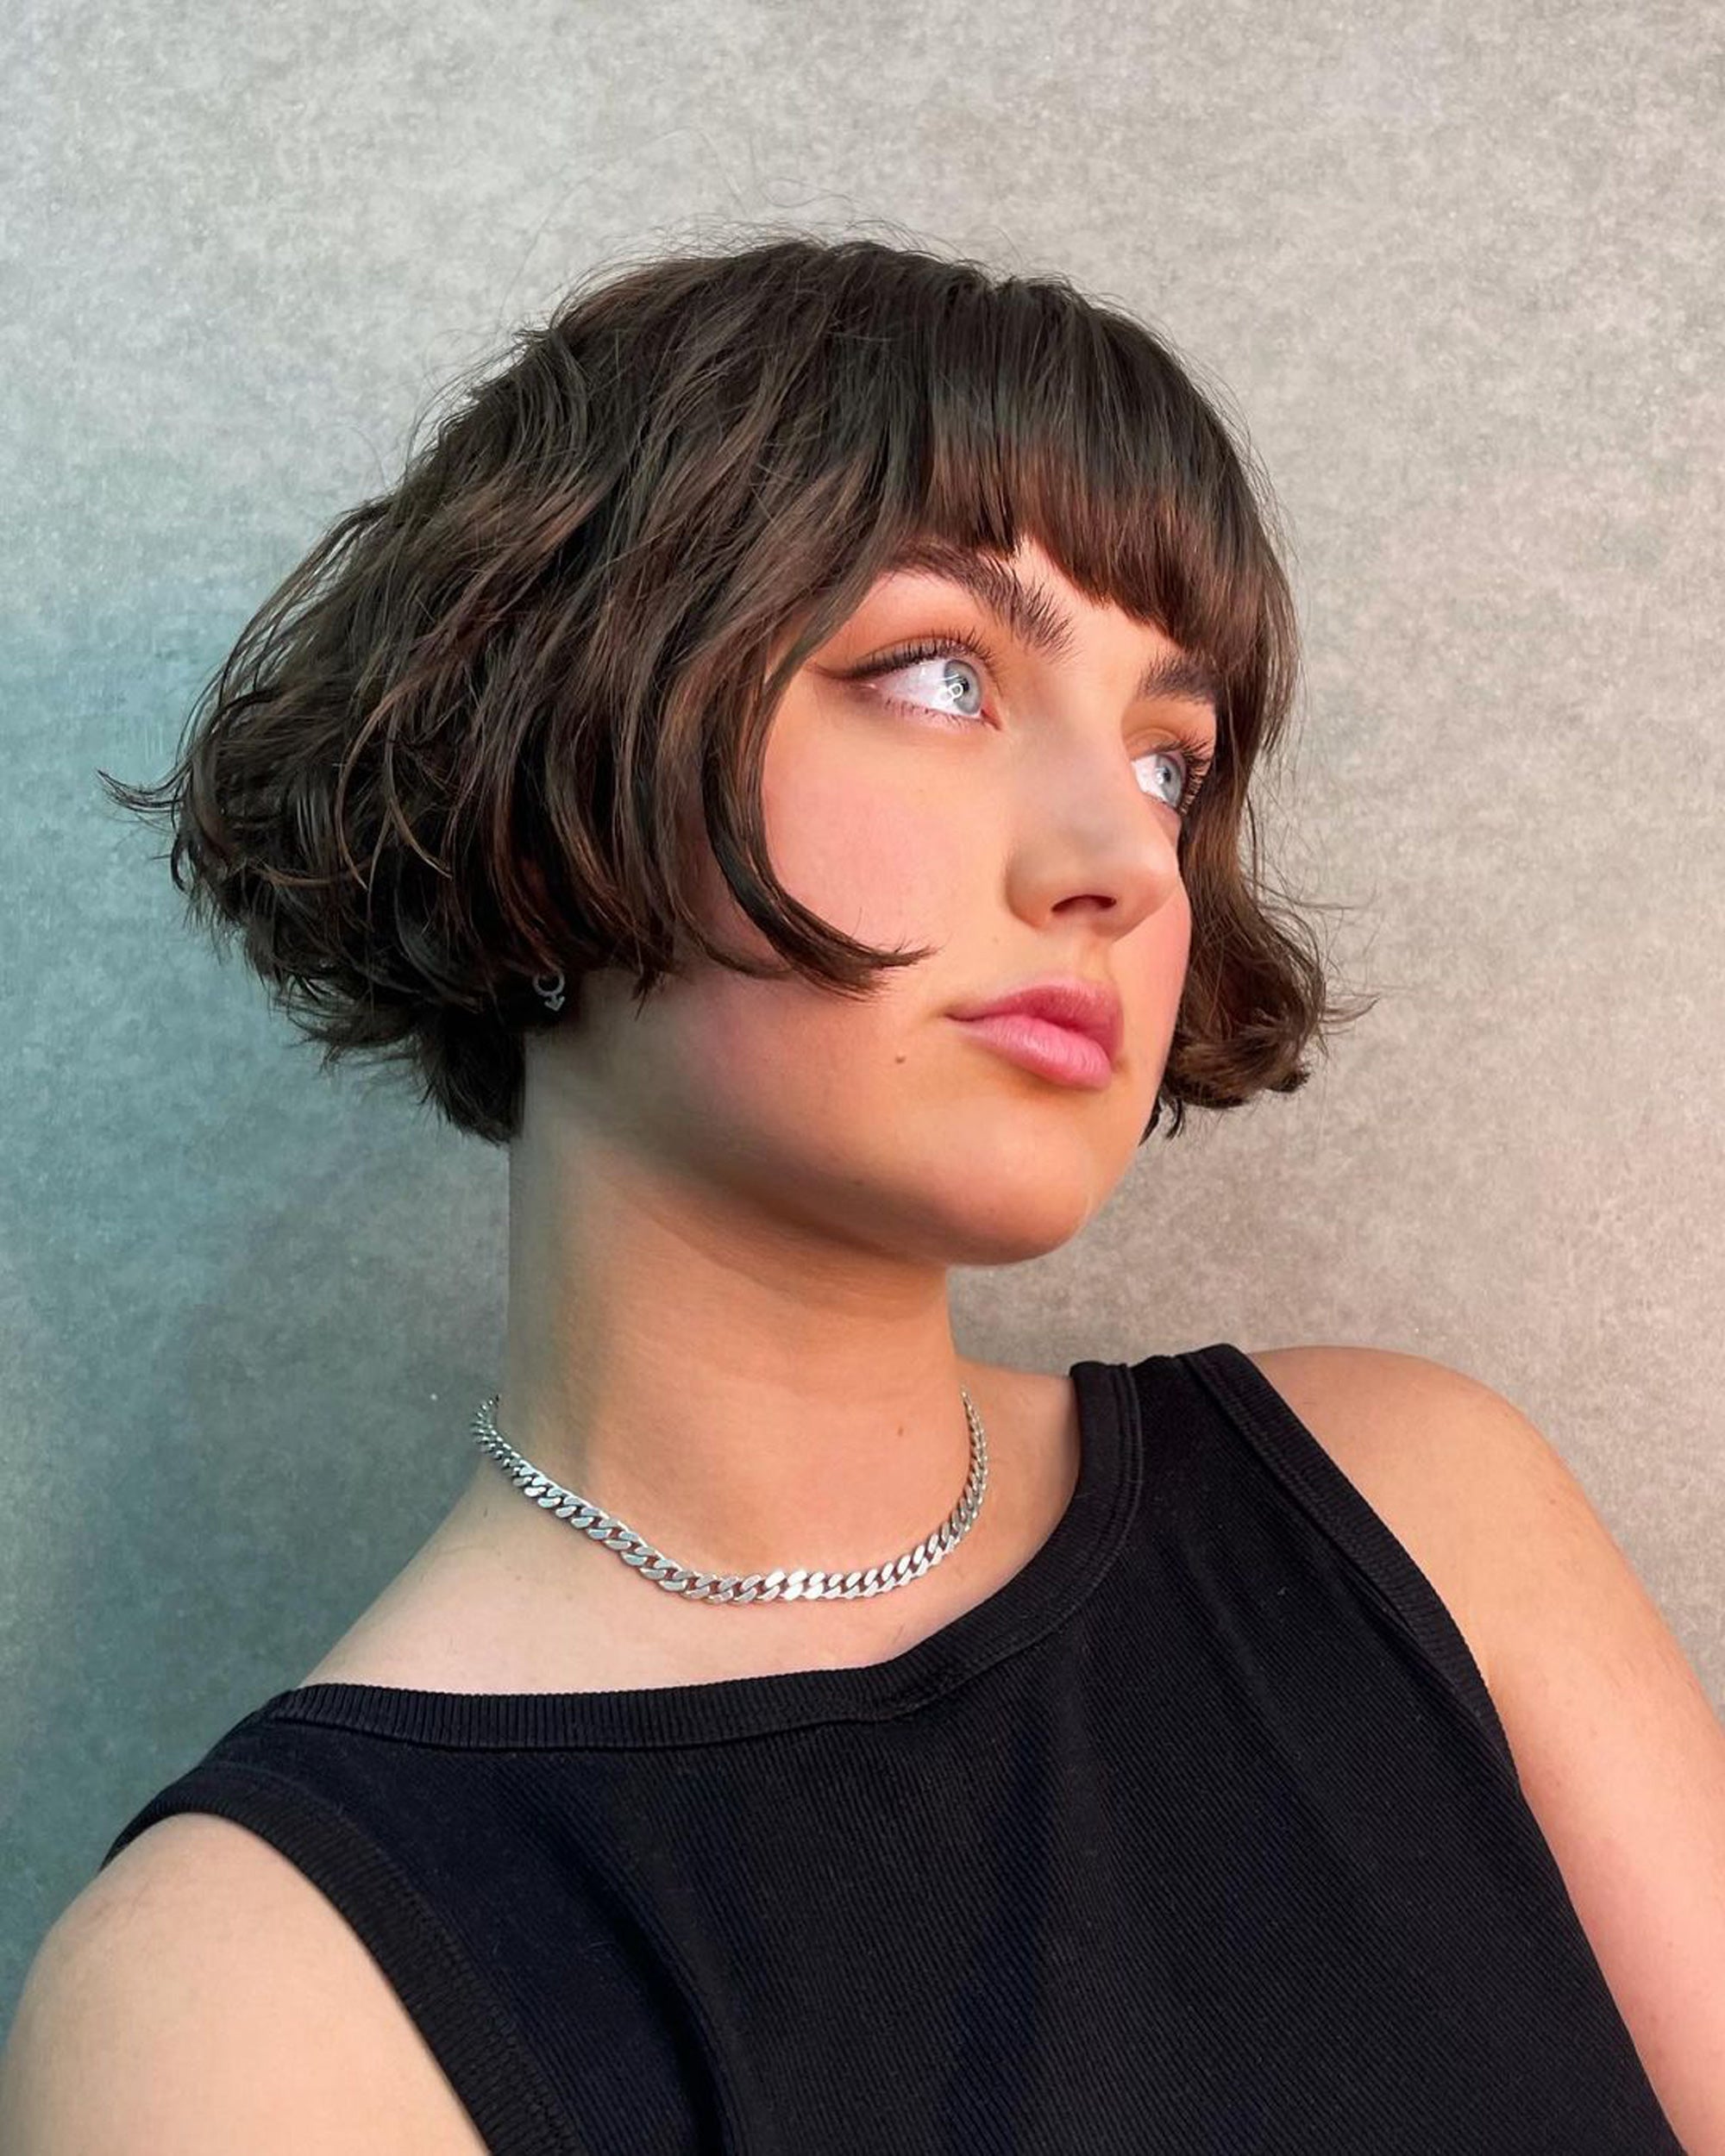 15 Flattering A-Line Bob Haircuts You'll Want to Try